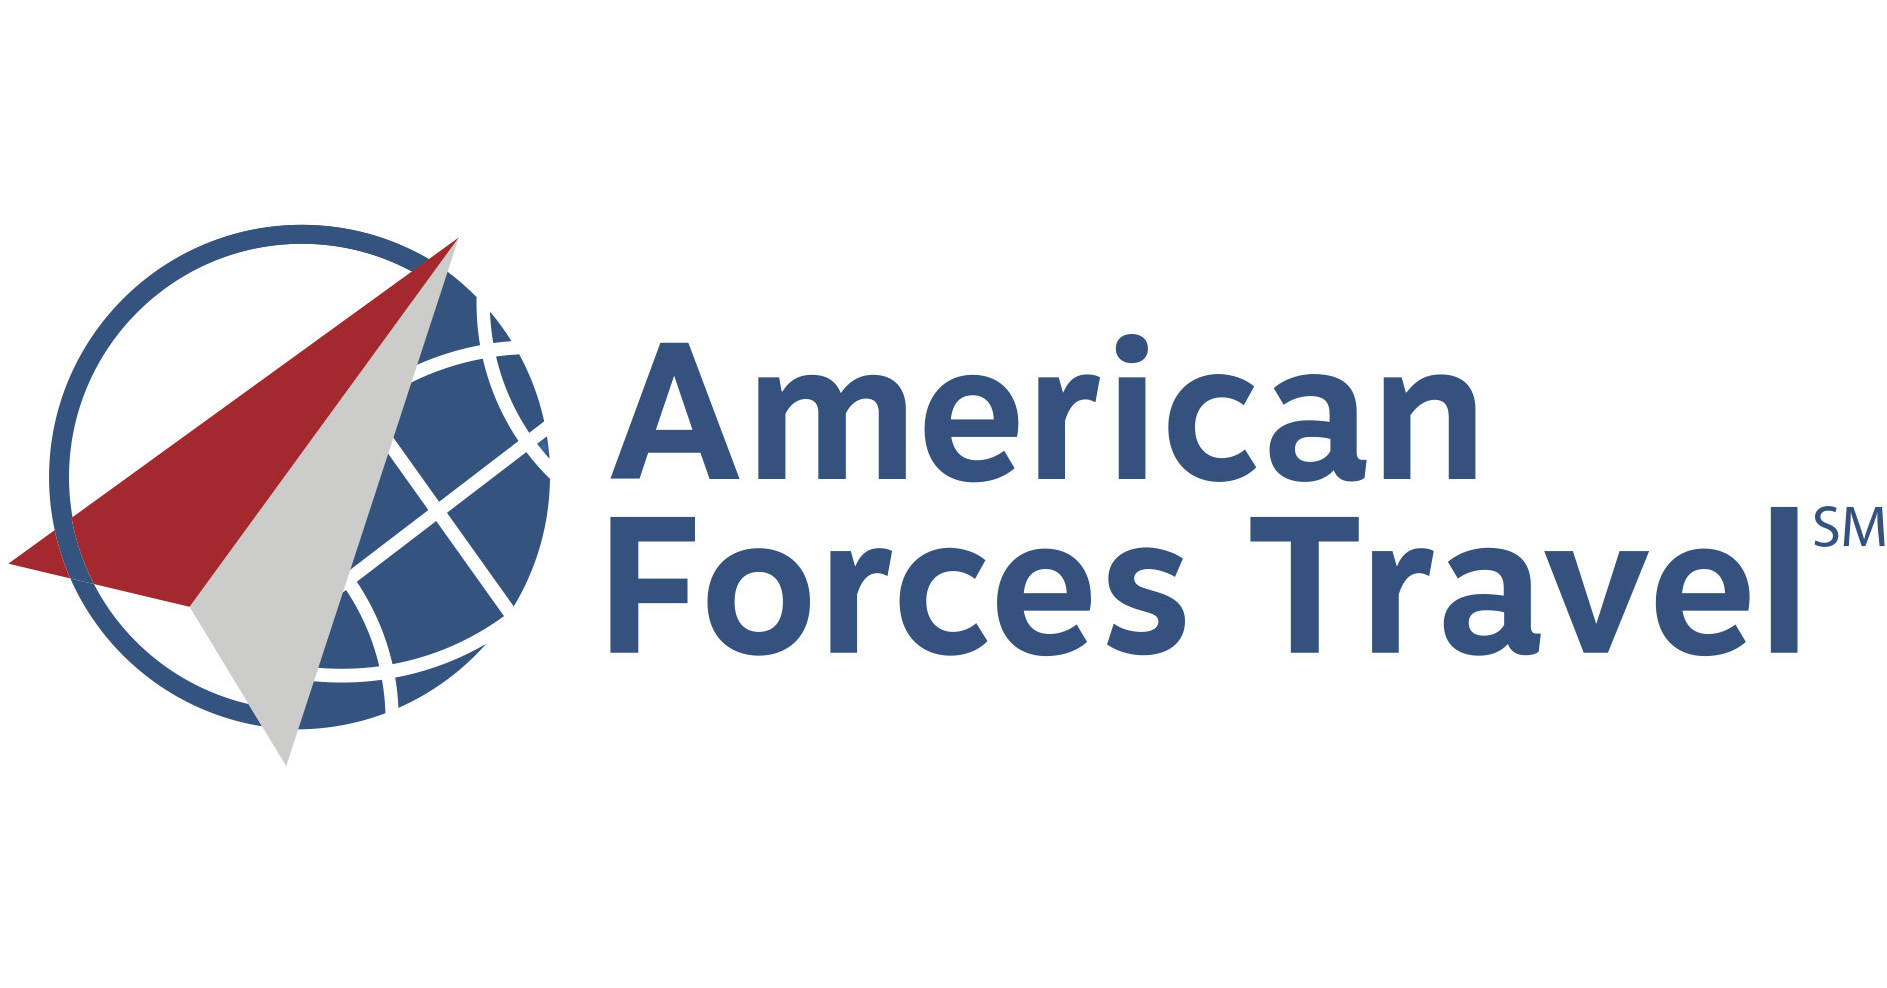 AMERICAN FORCES TRAVEL